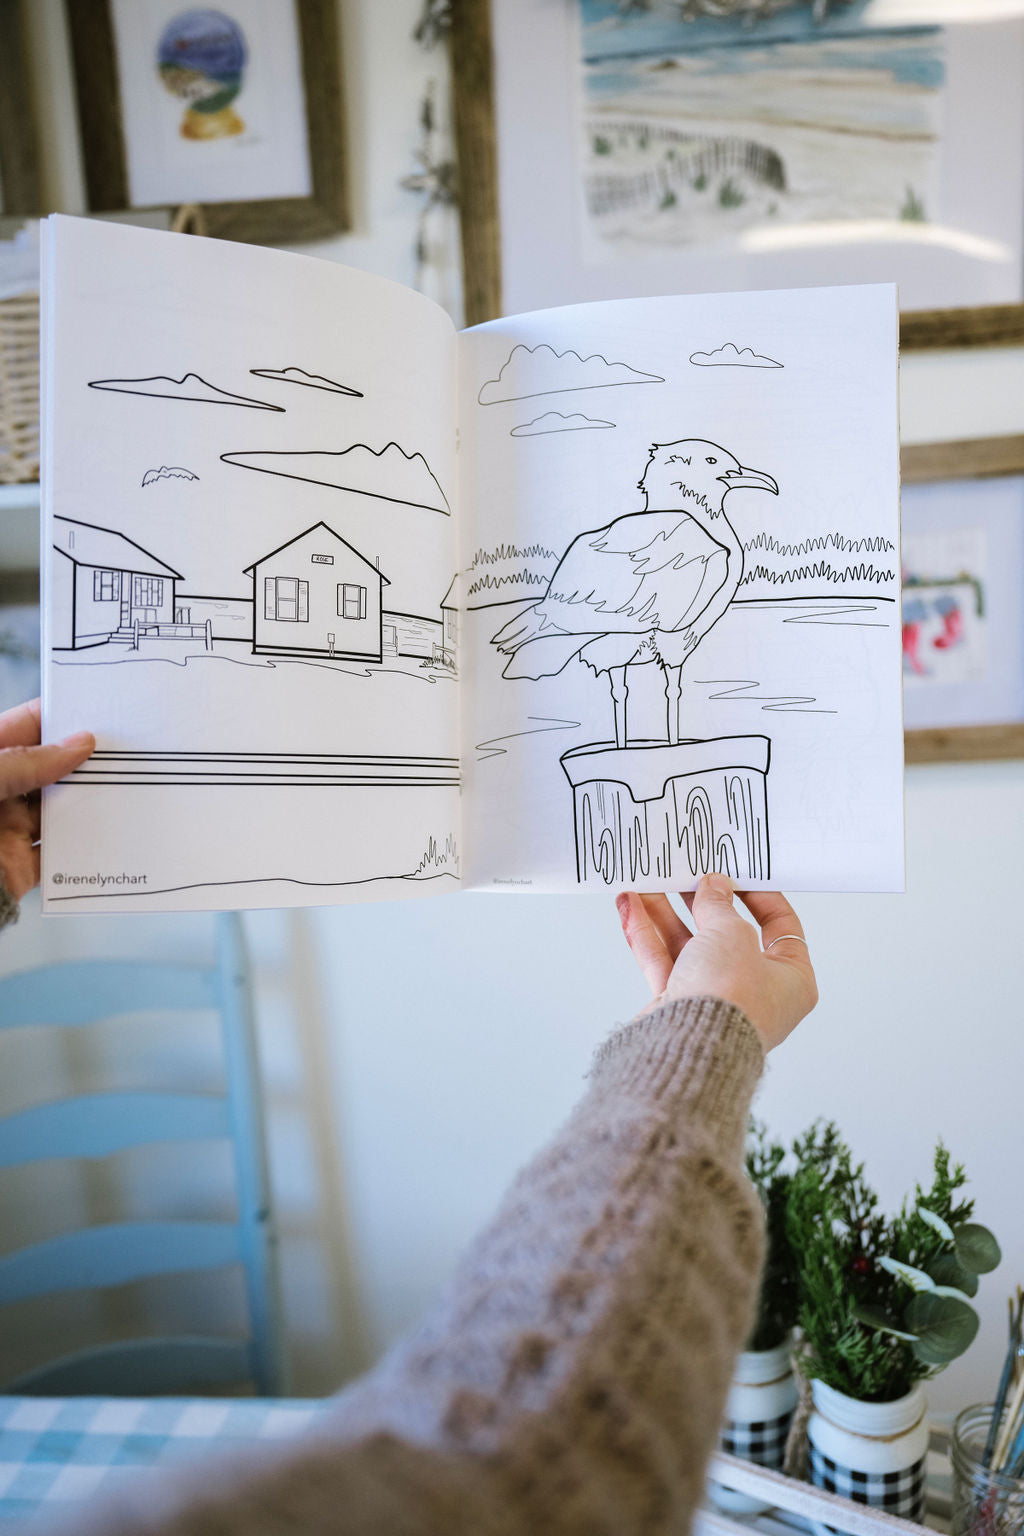 “Cape Cod in Color” A Coloring Book For All Ages